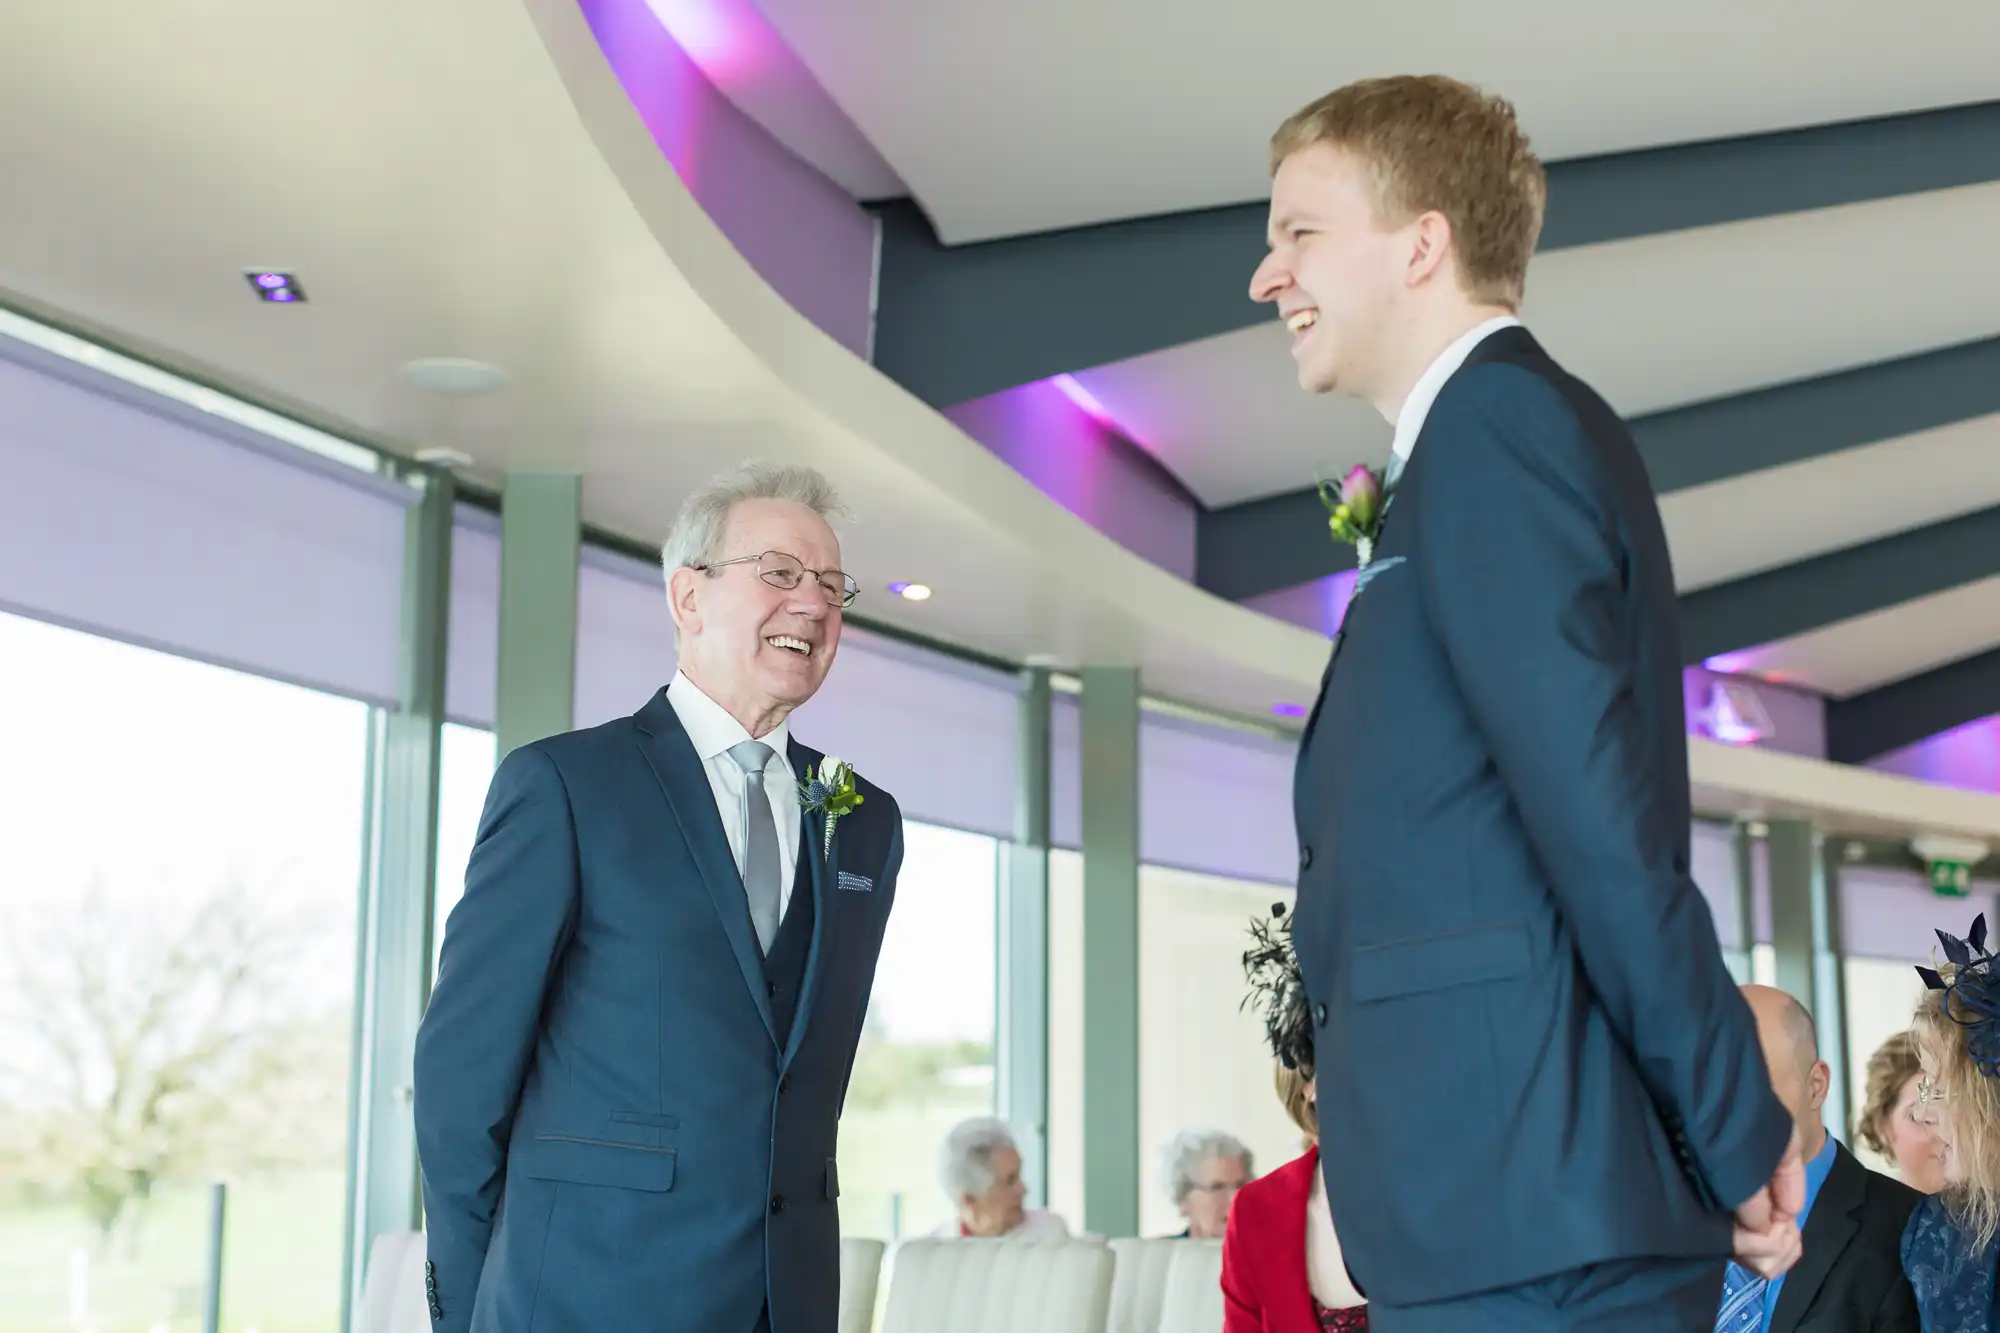 Two men smiling at each other in a bright room during a formal event, one older and one younger, both wearing dark suits and boutonnieres.